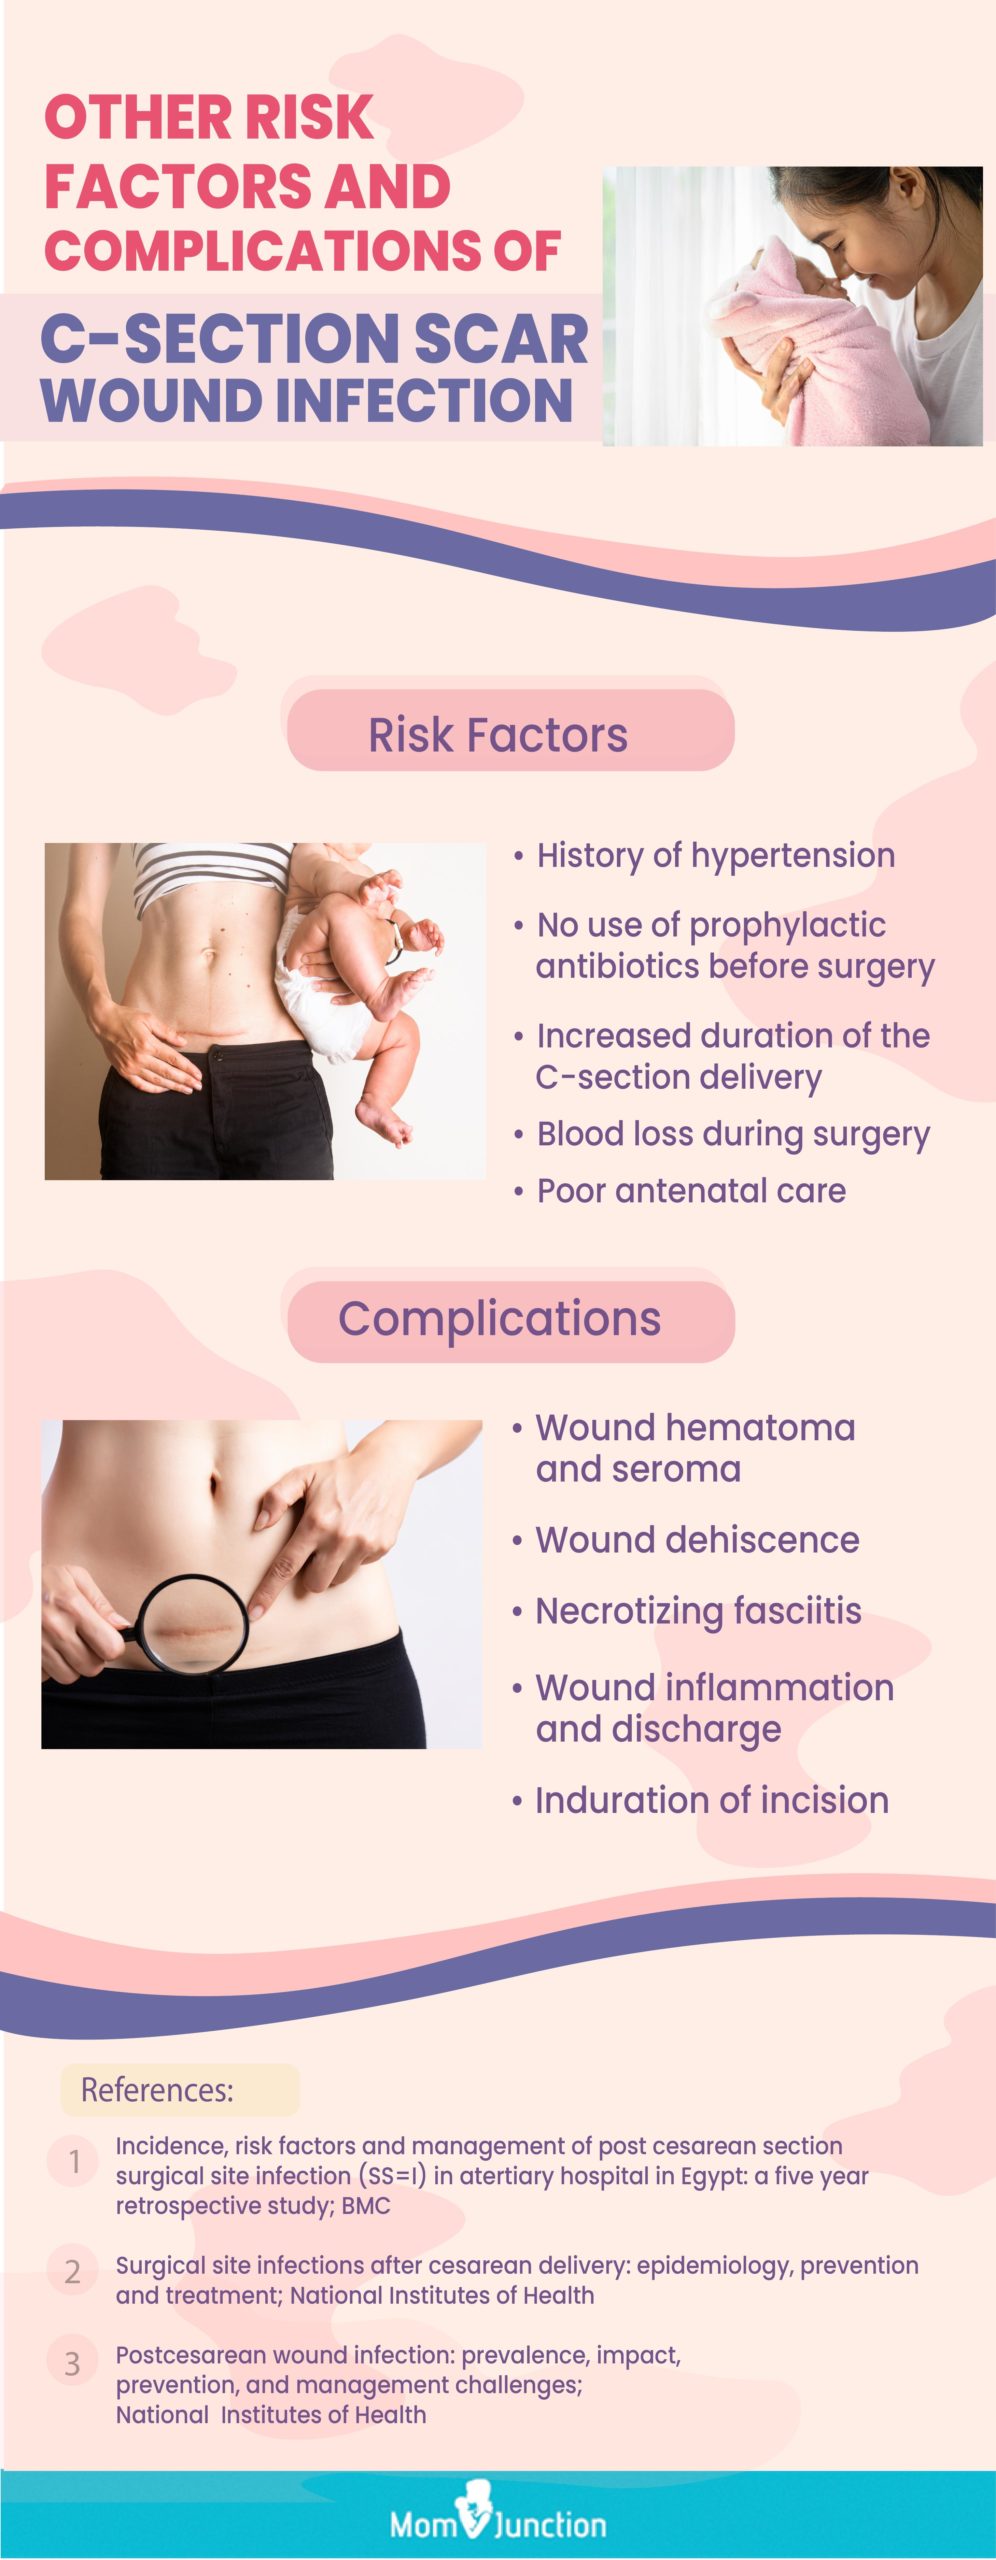 other risk factors and complications of c-section scar wound infection [infographic]